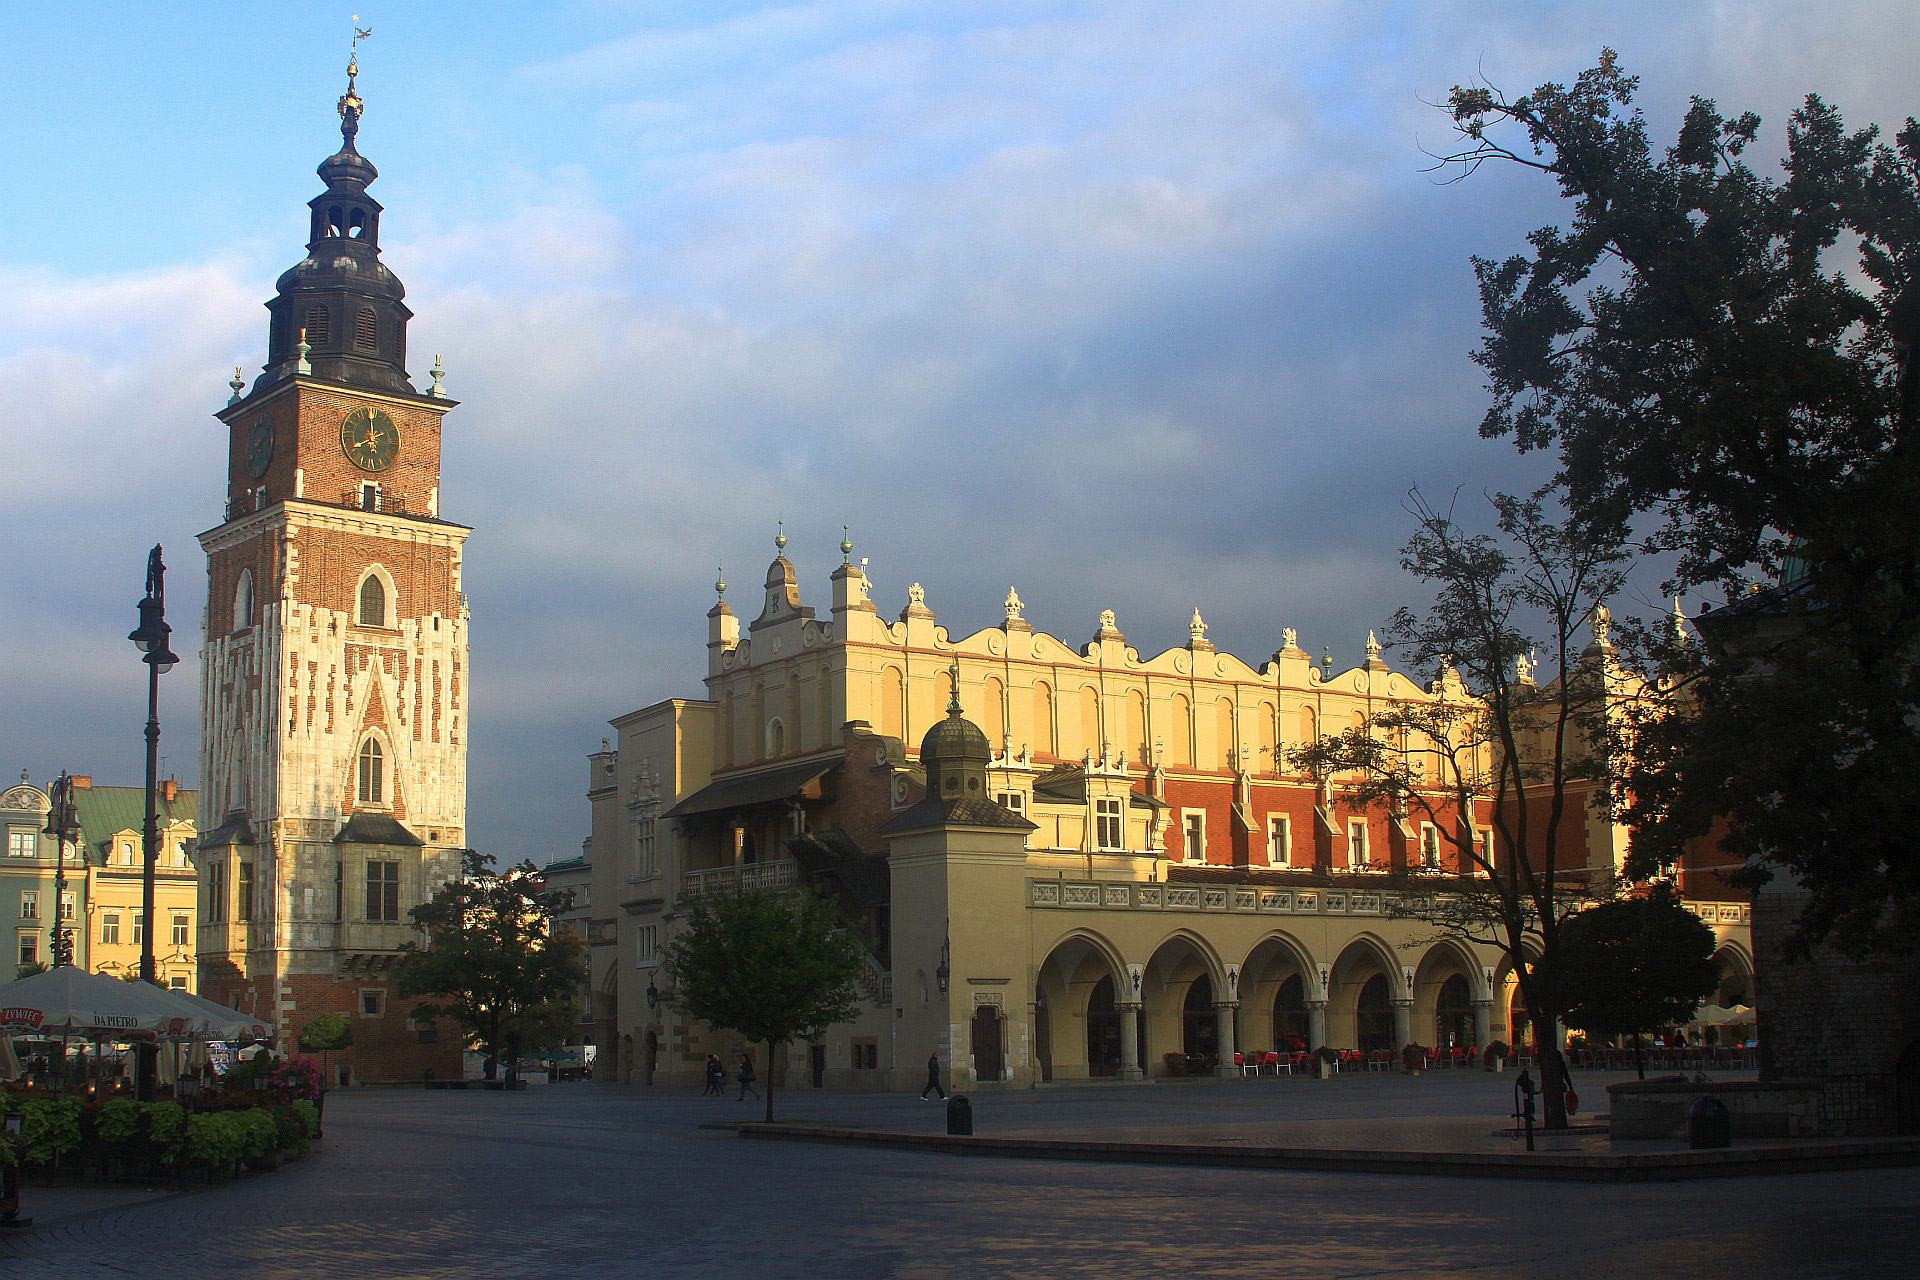 Cracow's Old Town